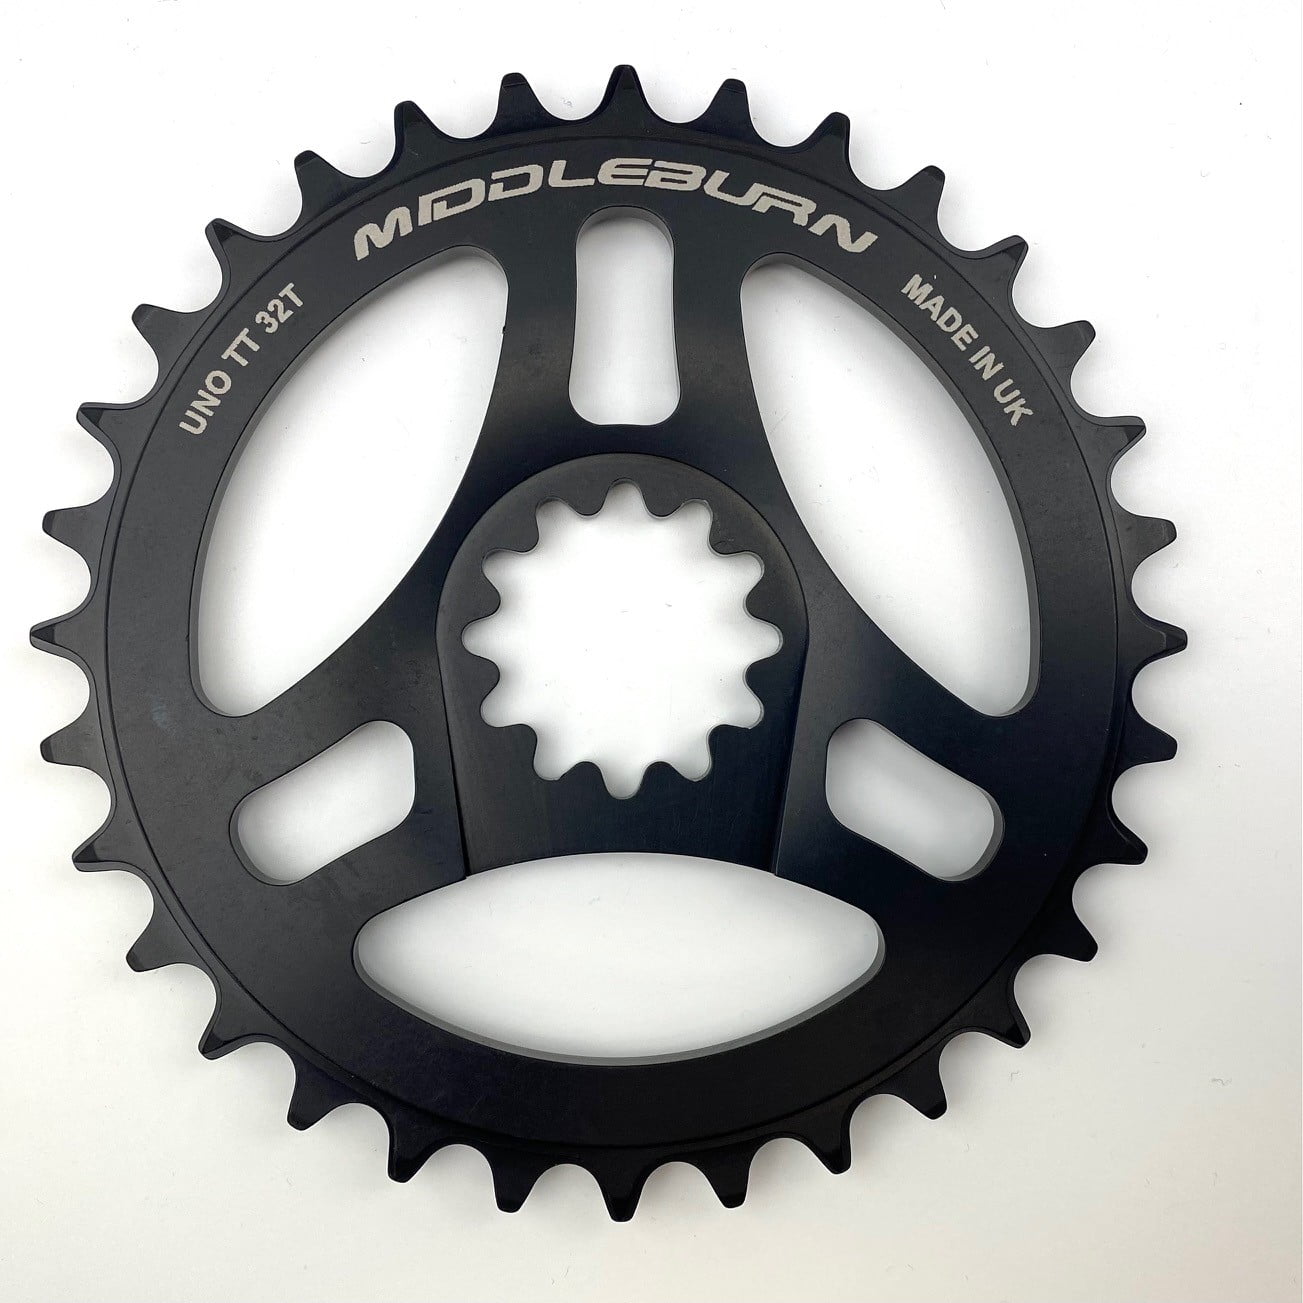 MIDDLEBURN RS7 SP-SQ-UNO-TT-332-32-HC CHAINRING